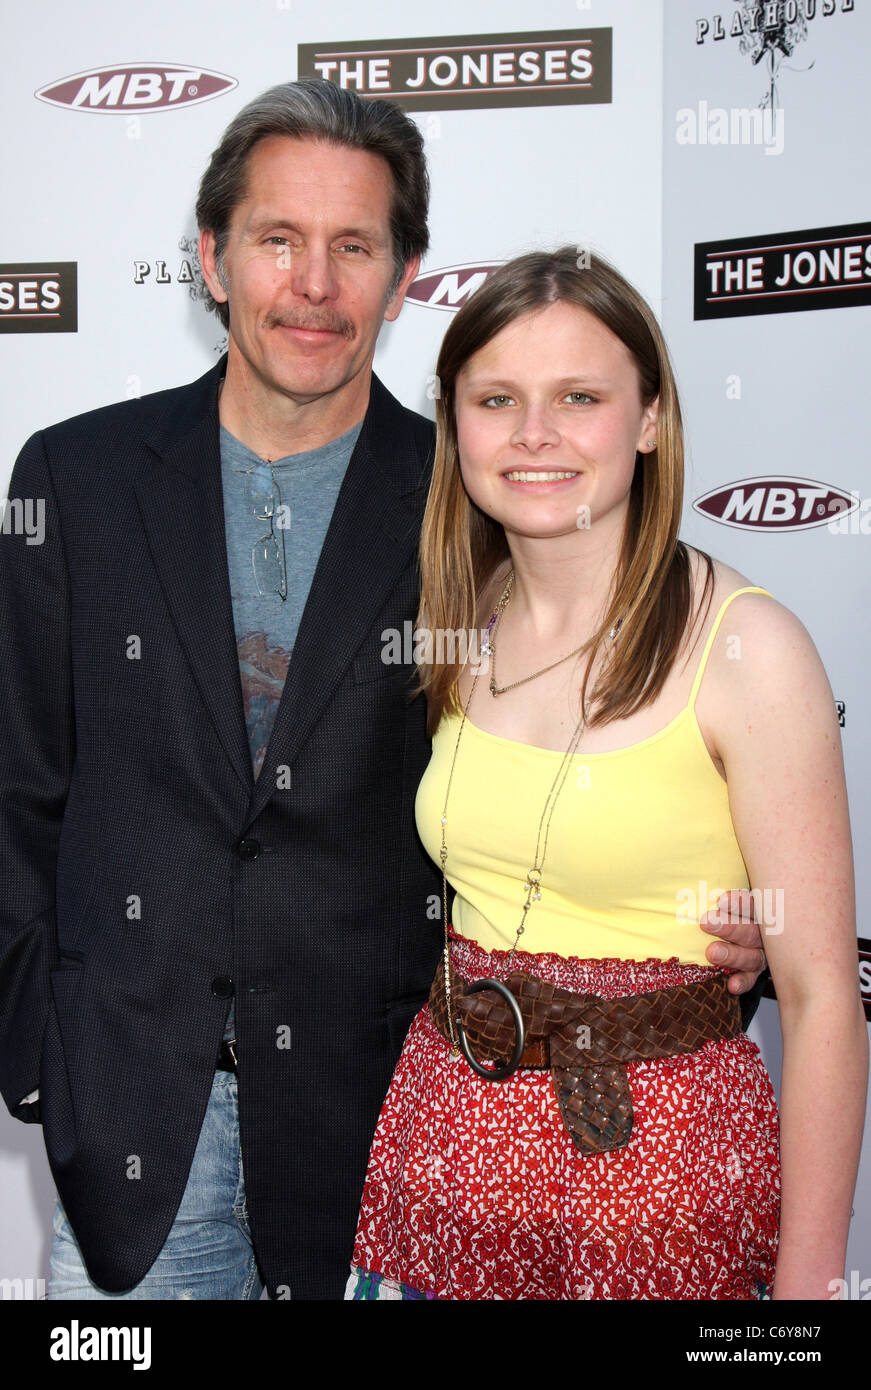 Gary Cole with his daughter Mary Cole Los Angeles premiere of 'The Joneses' at the ArcLight Cinemas in Hollywood Los Angeles, Stock Photo